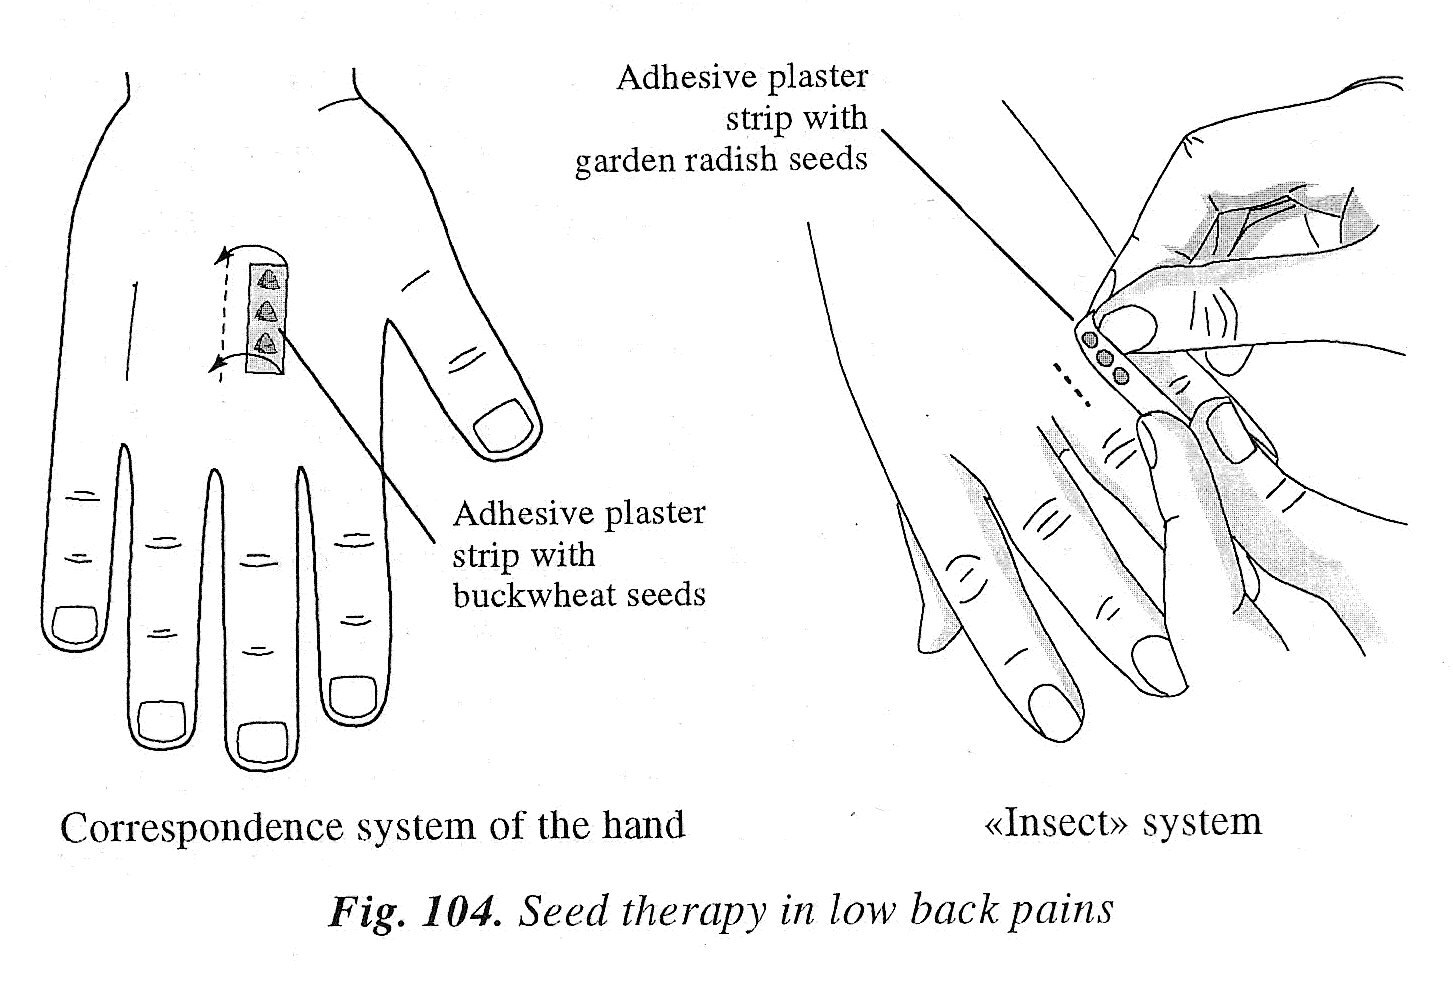 [Seed+Therapy+-+Low+back+Pain+104.jpg]